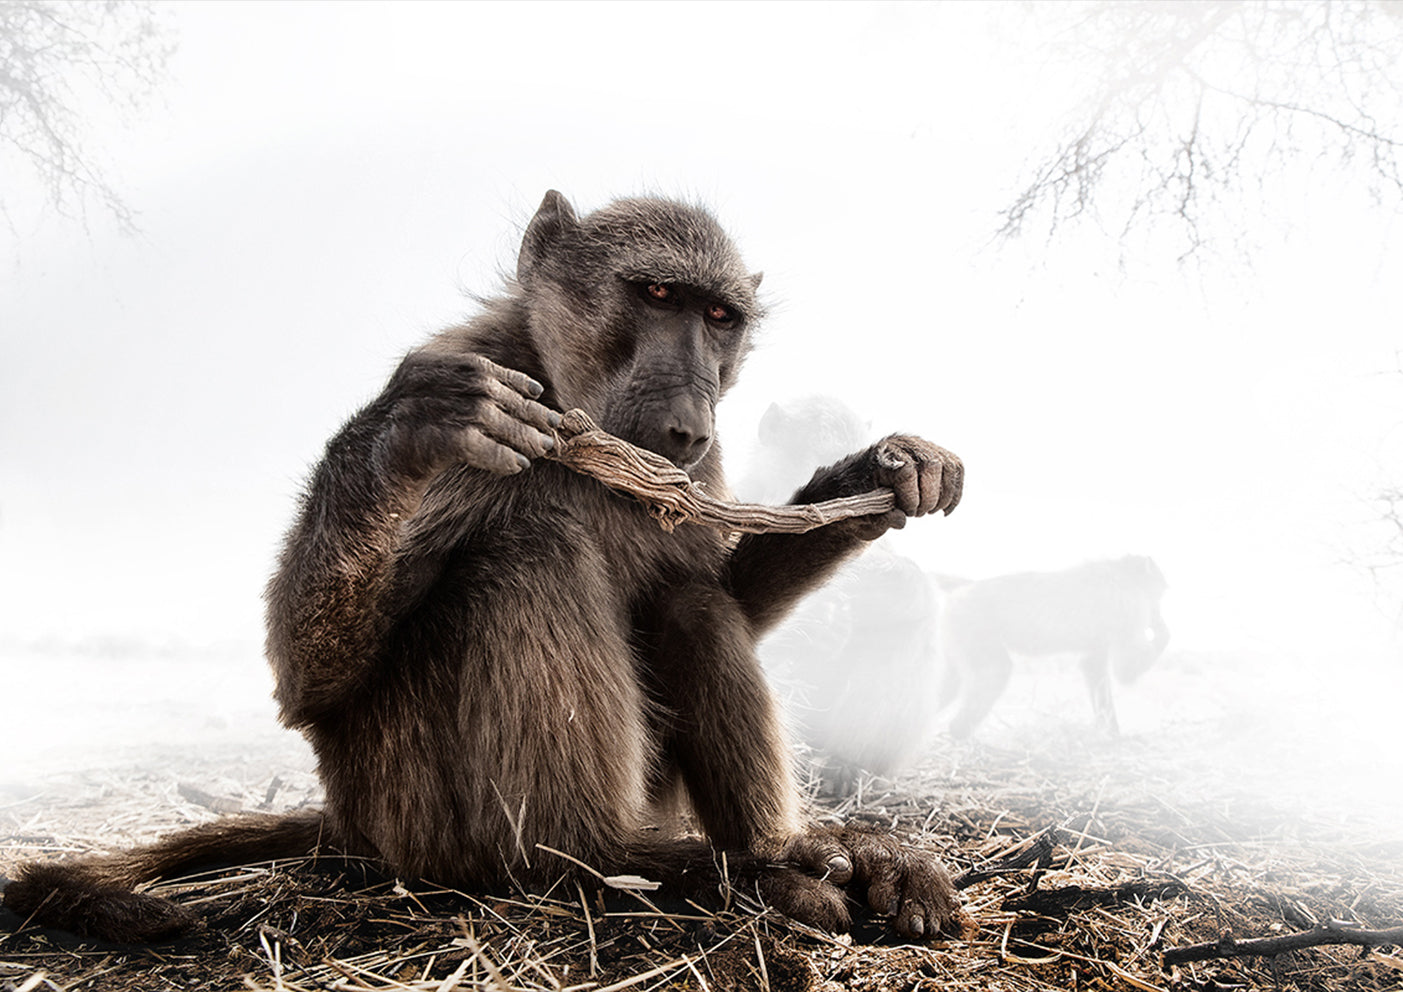 Baboon with Stick by Ryan Abbott